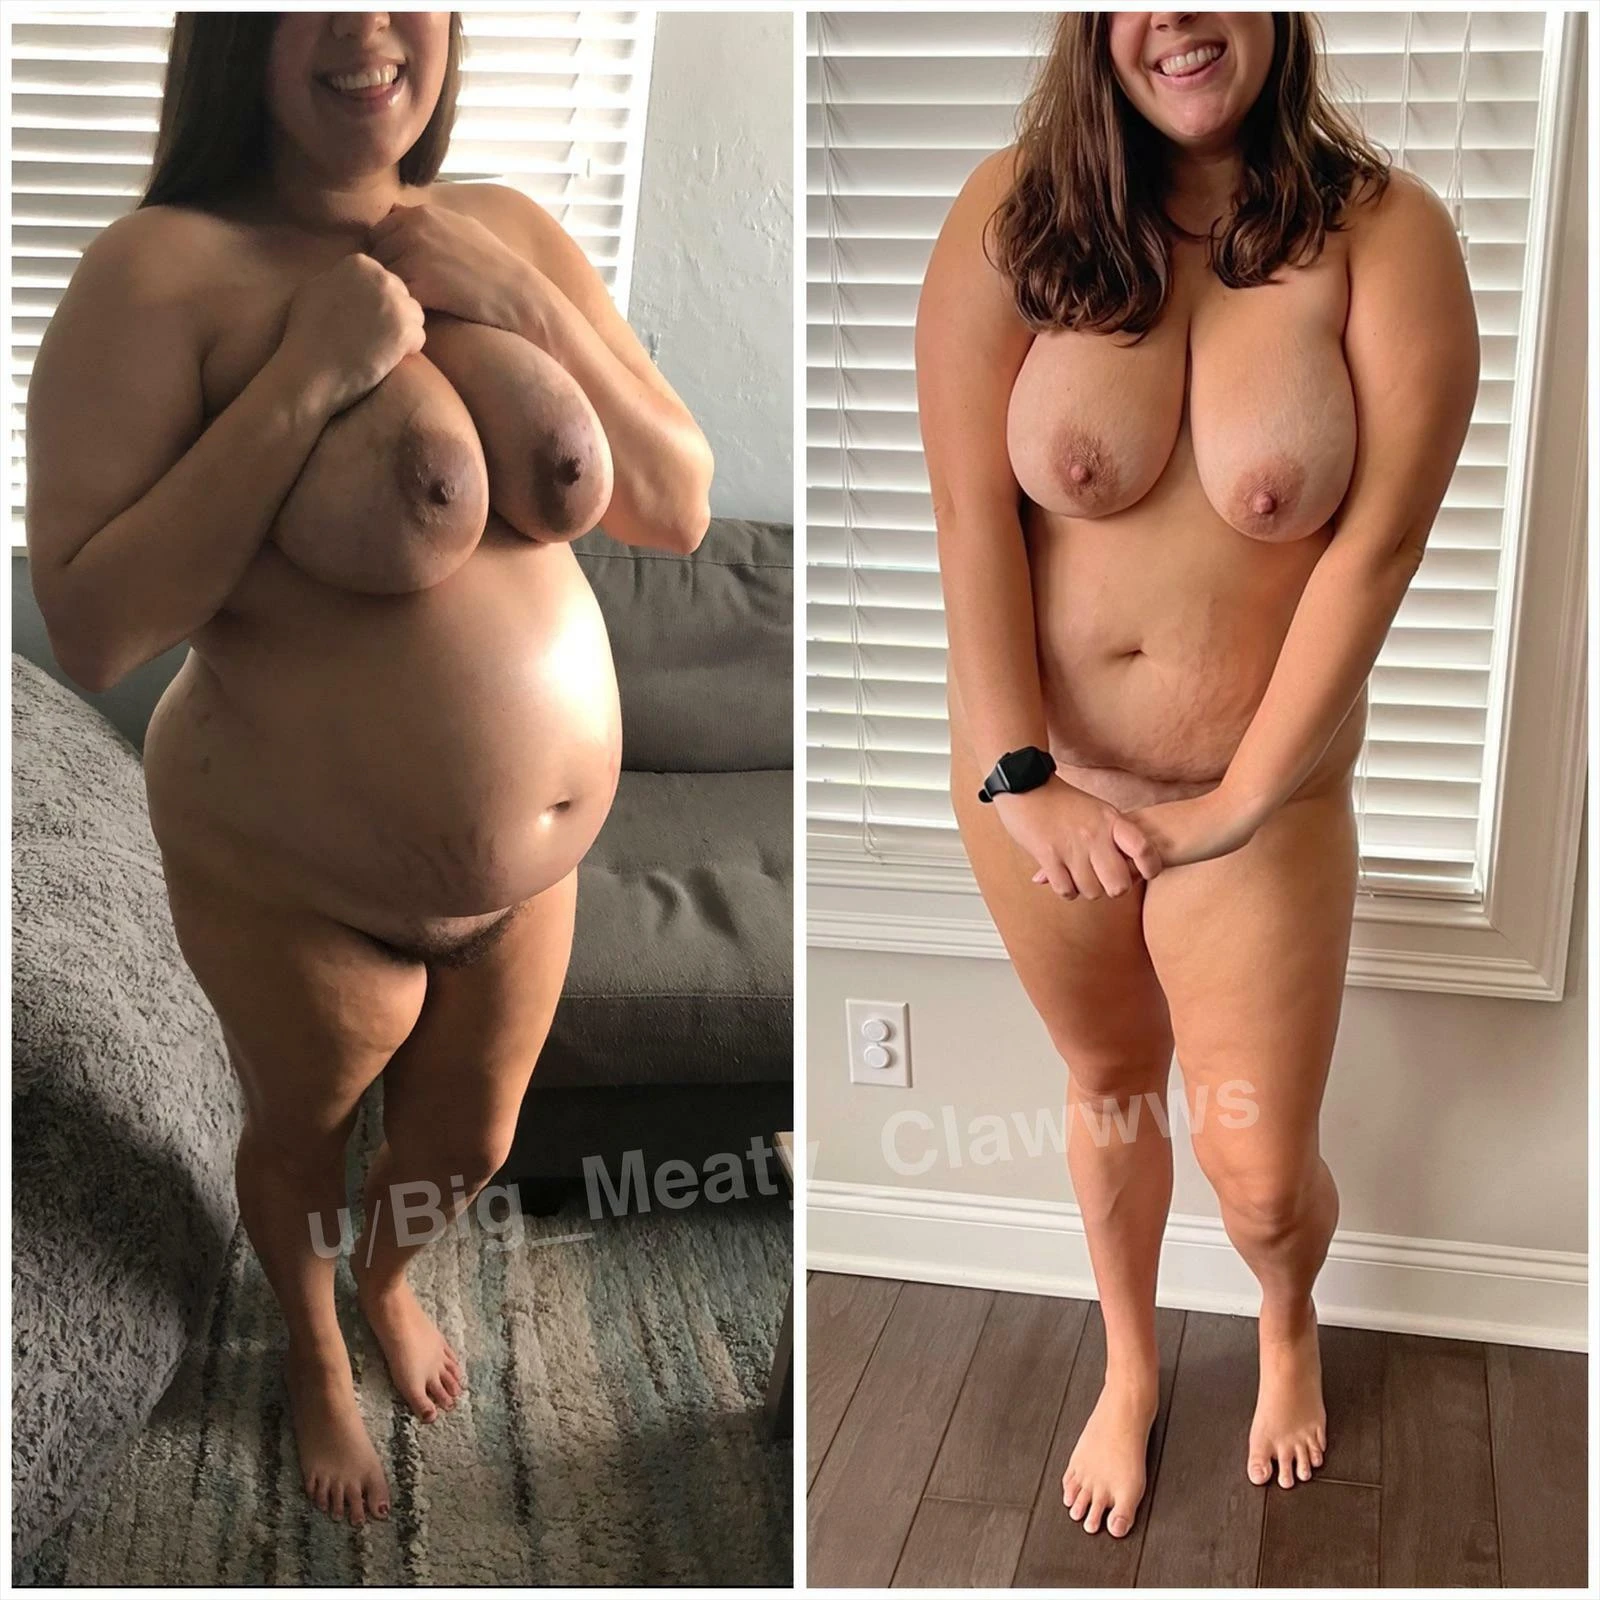 My wife during and after pregnancy. Which is your favorite?